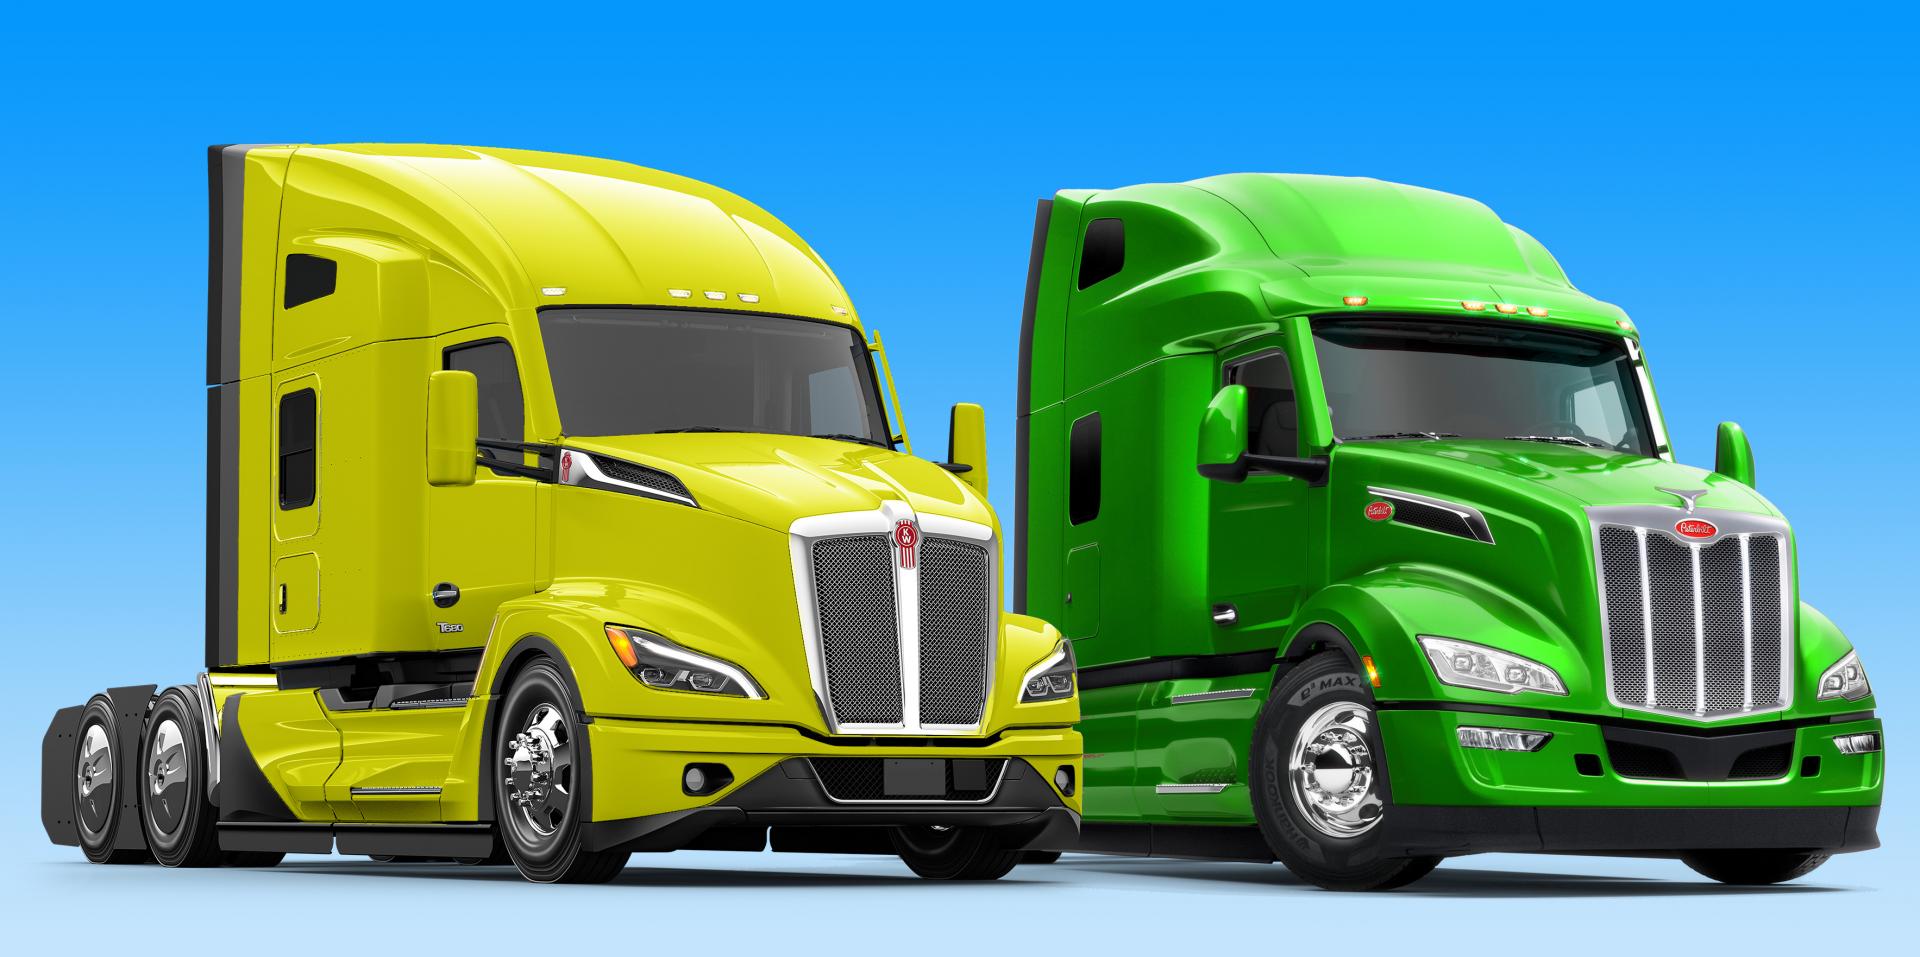 2021 next gen t680 and 579 yellow and green